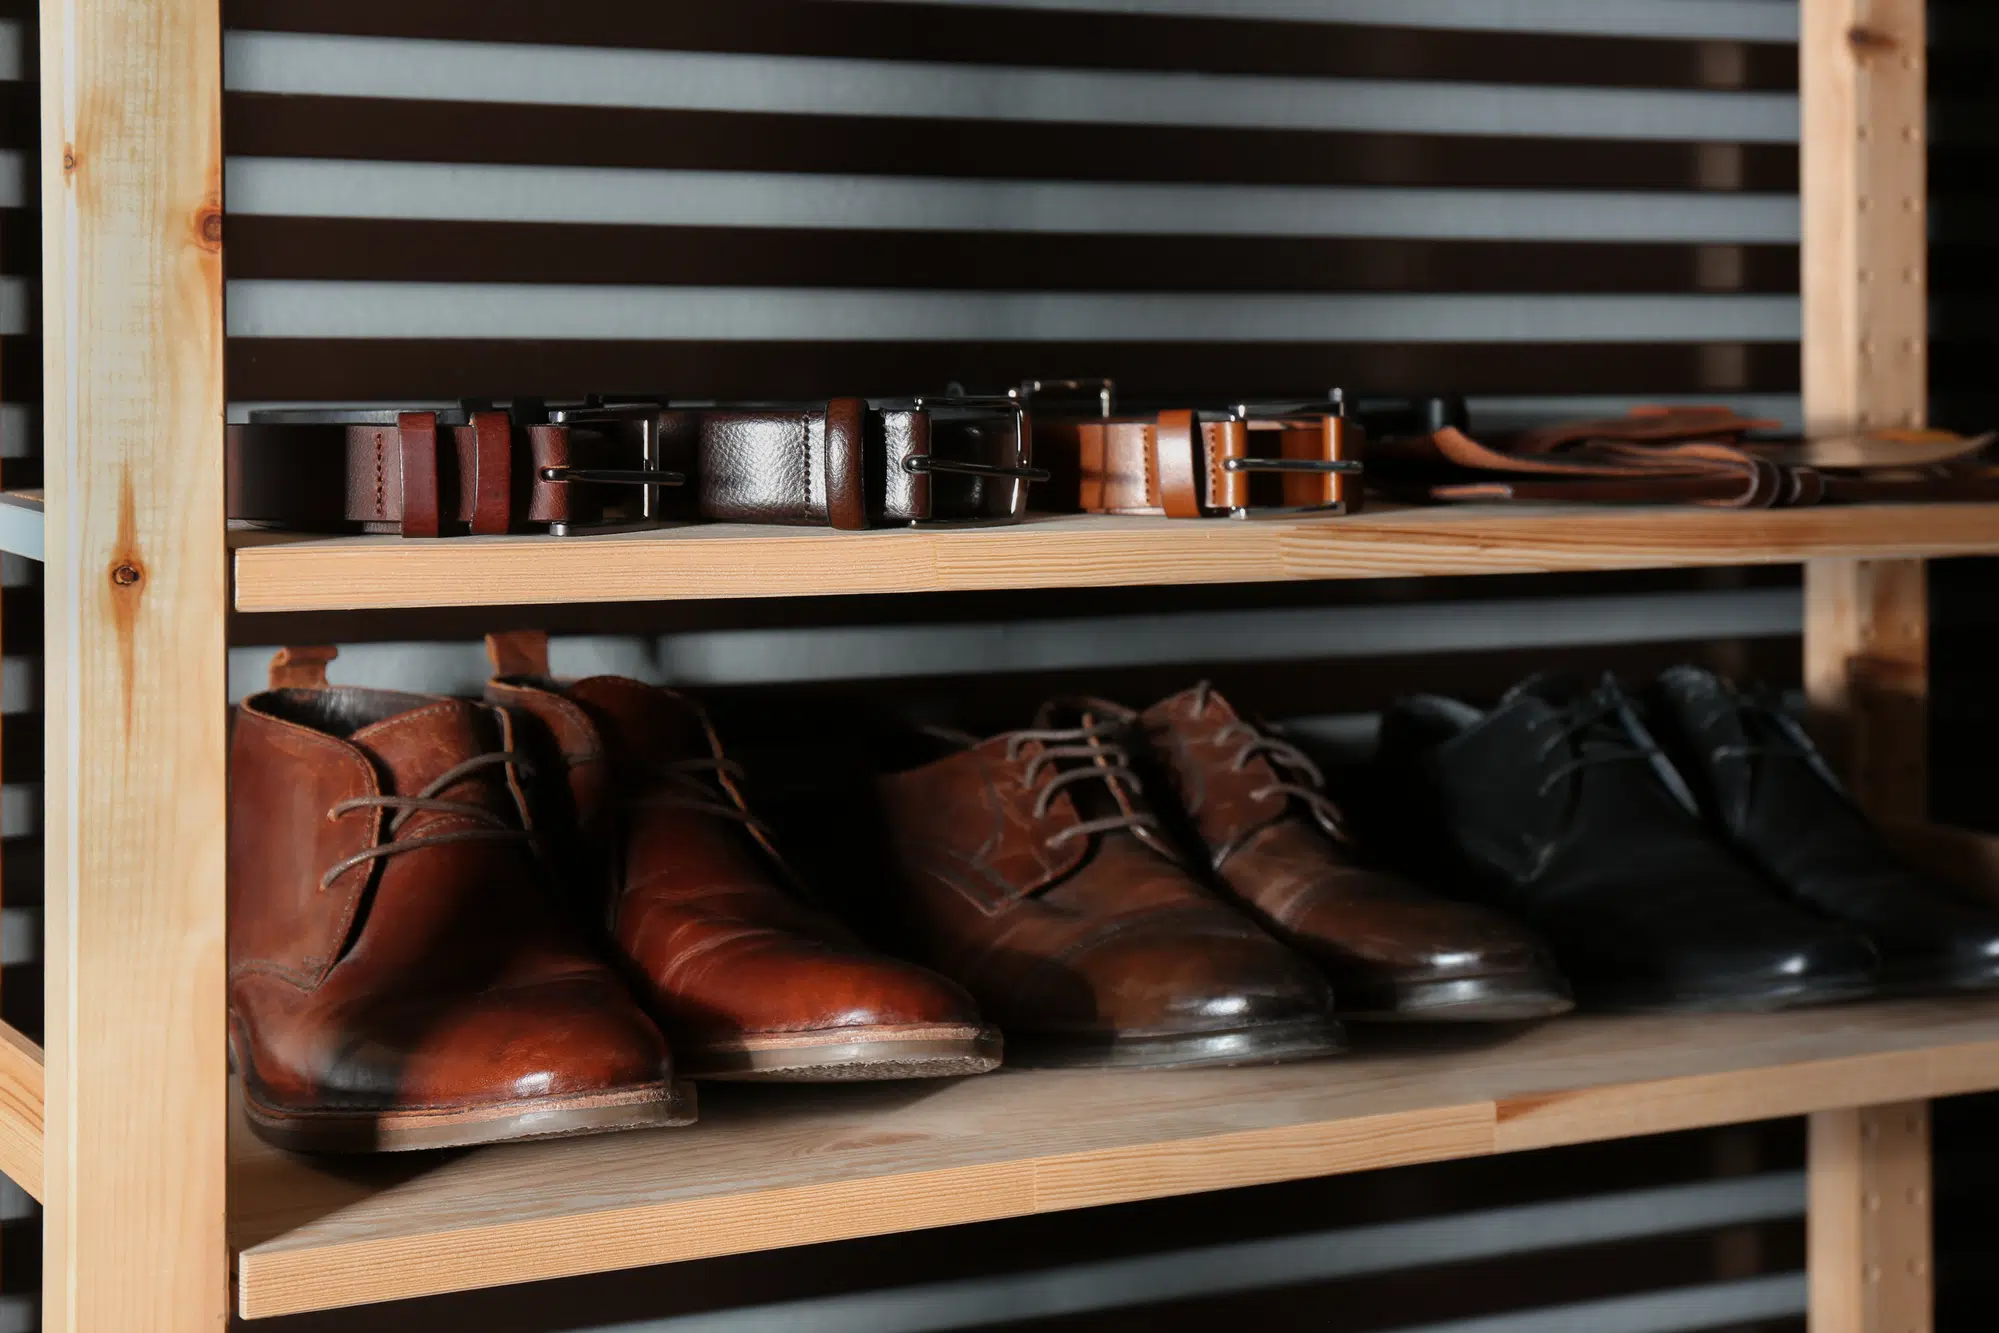 Leather shoes in shelving unit